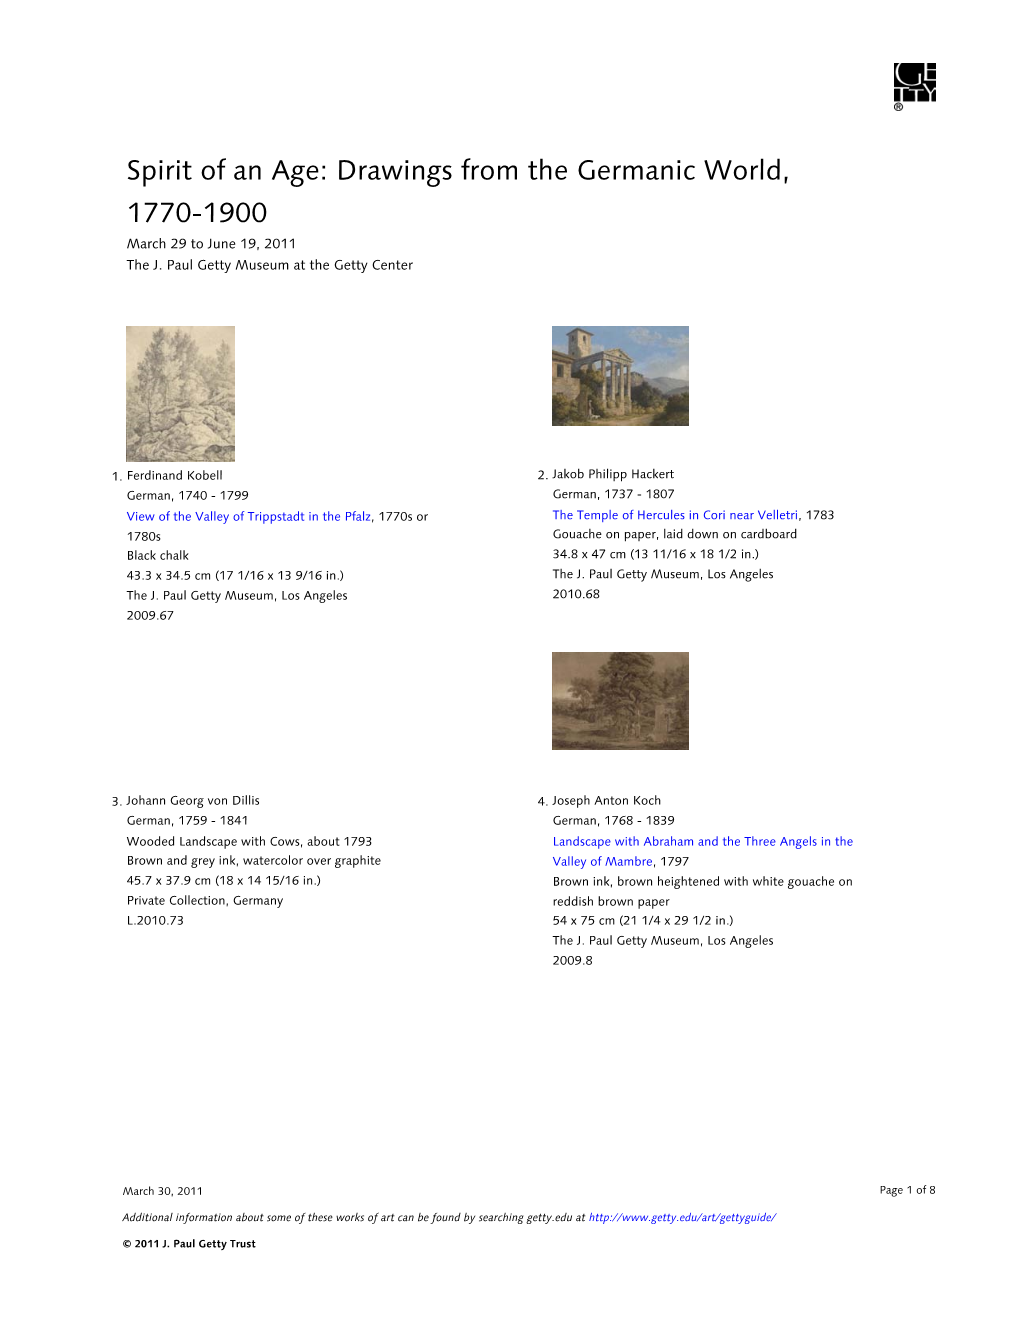 Drawings from the Germanic World, 1770-1900 March 29 to June 19, 2011 the J